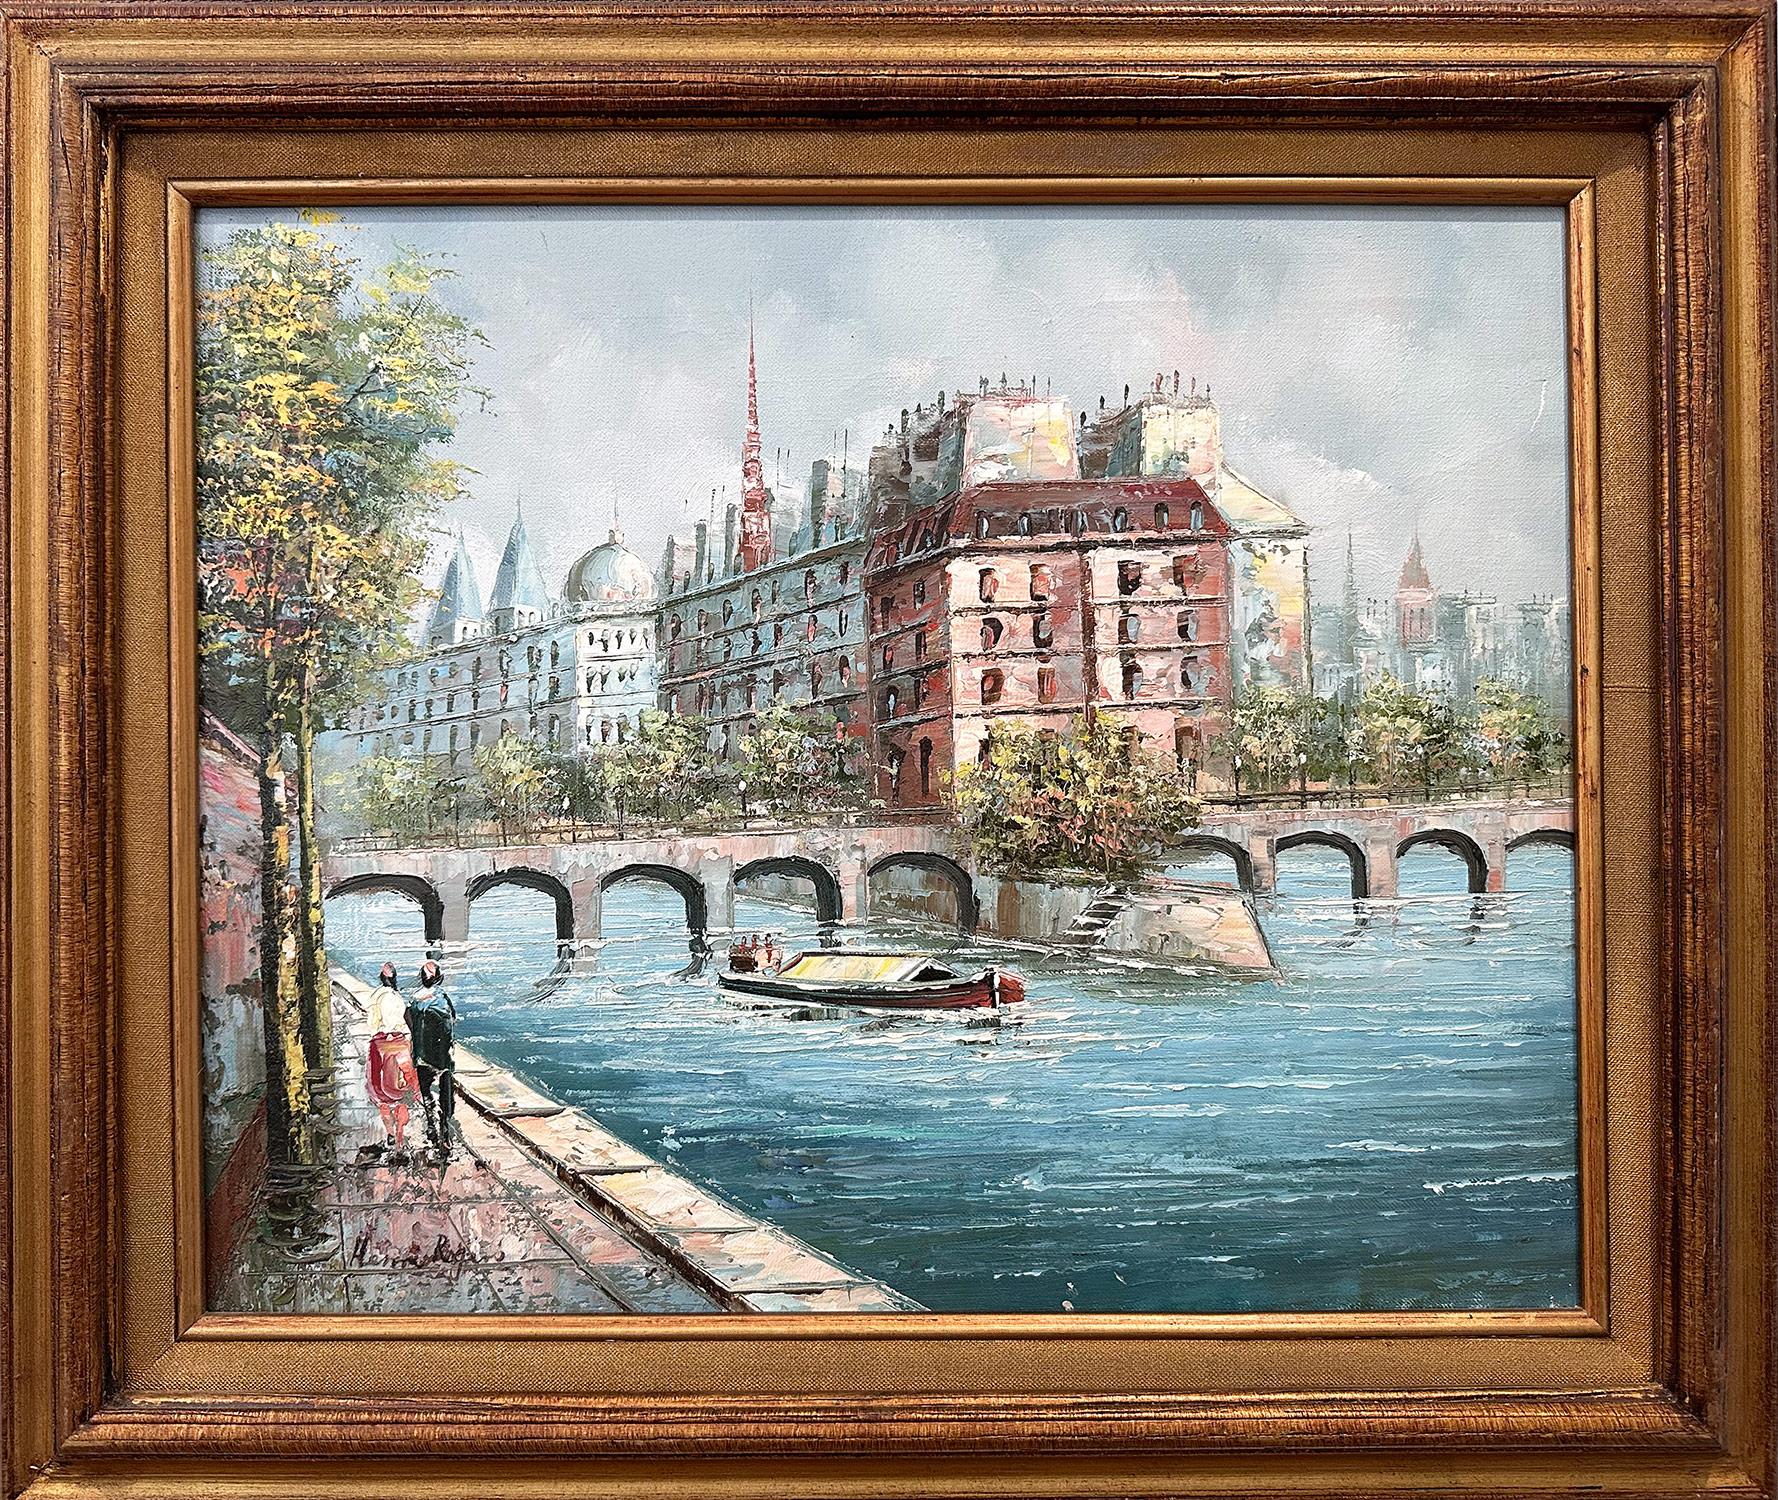 Roger Henry Landscape Painting - "Along the Seine" Parisian Street Post-Impressionist Oil Painting Canvas 